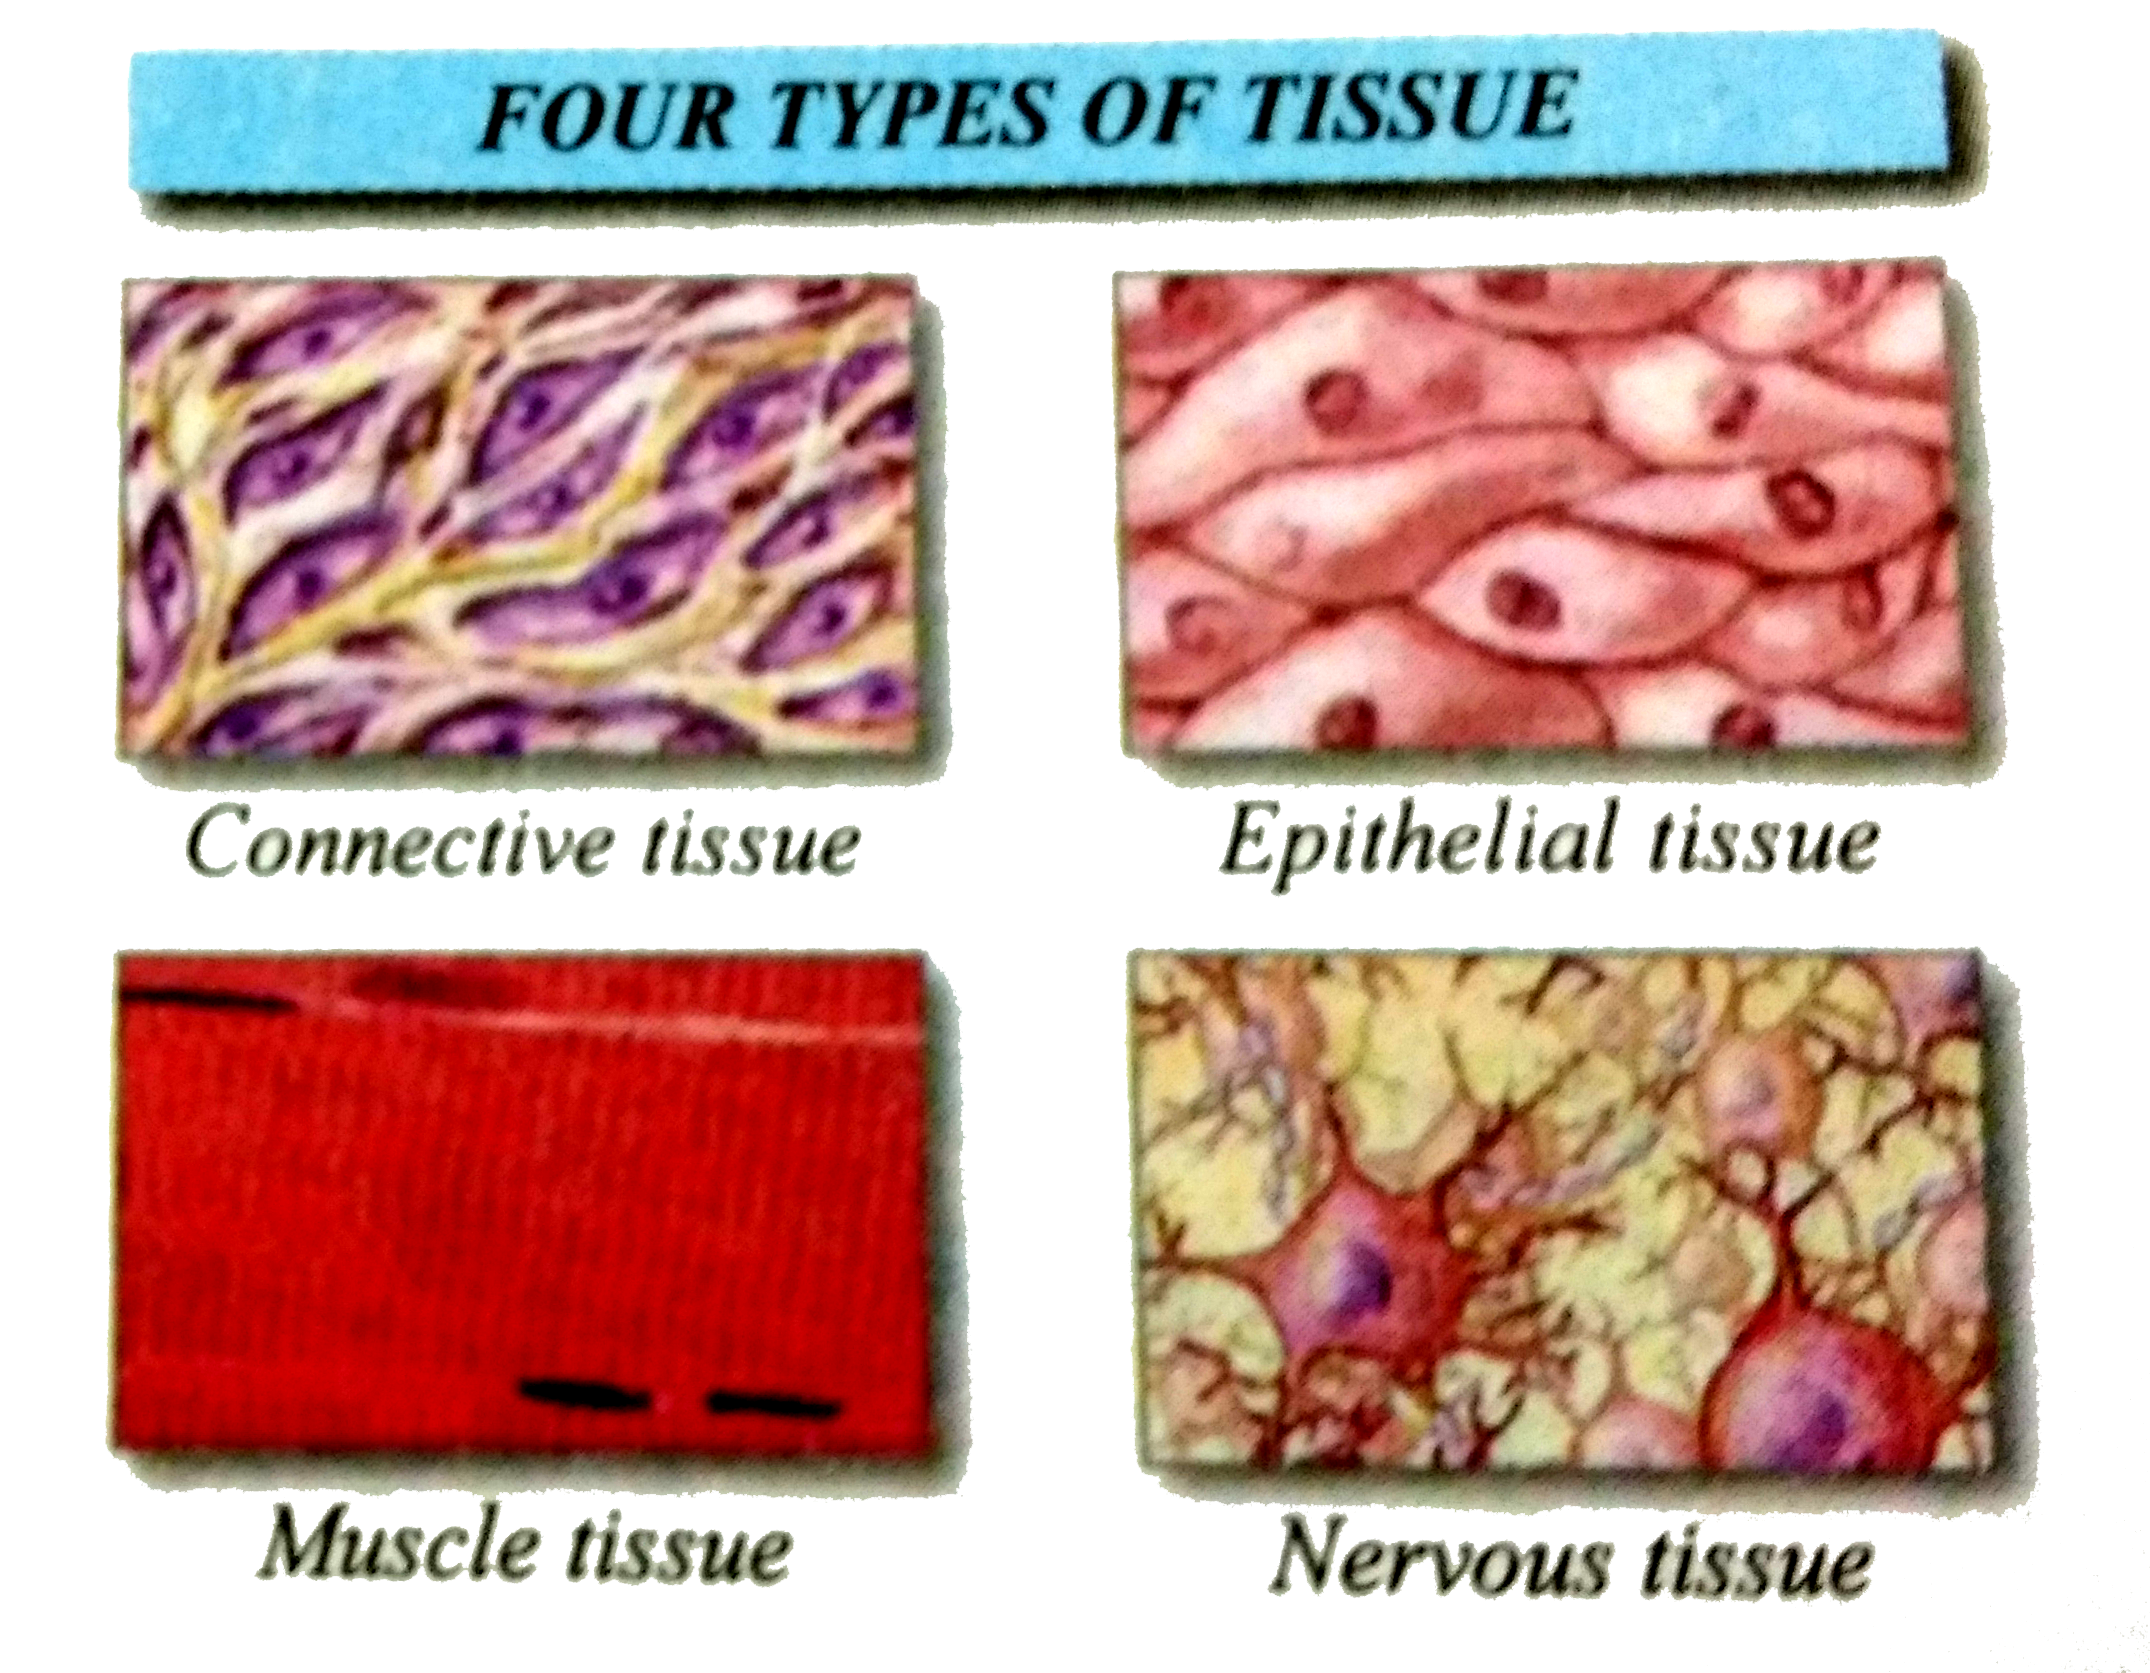 What is tissue? Which are the functions of tissue?